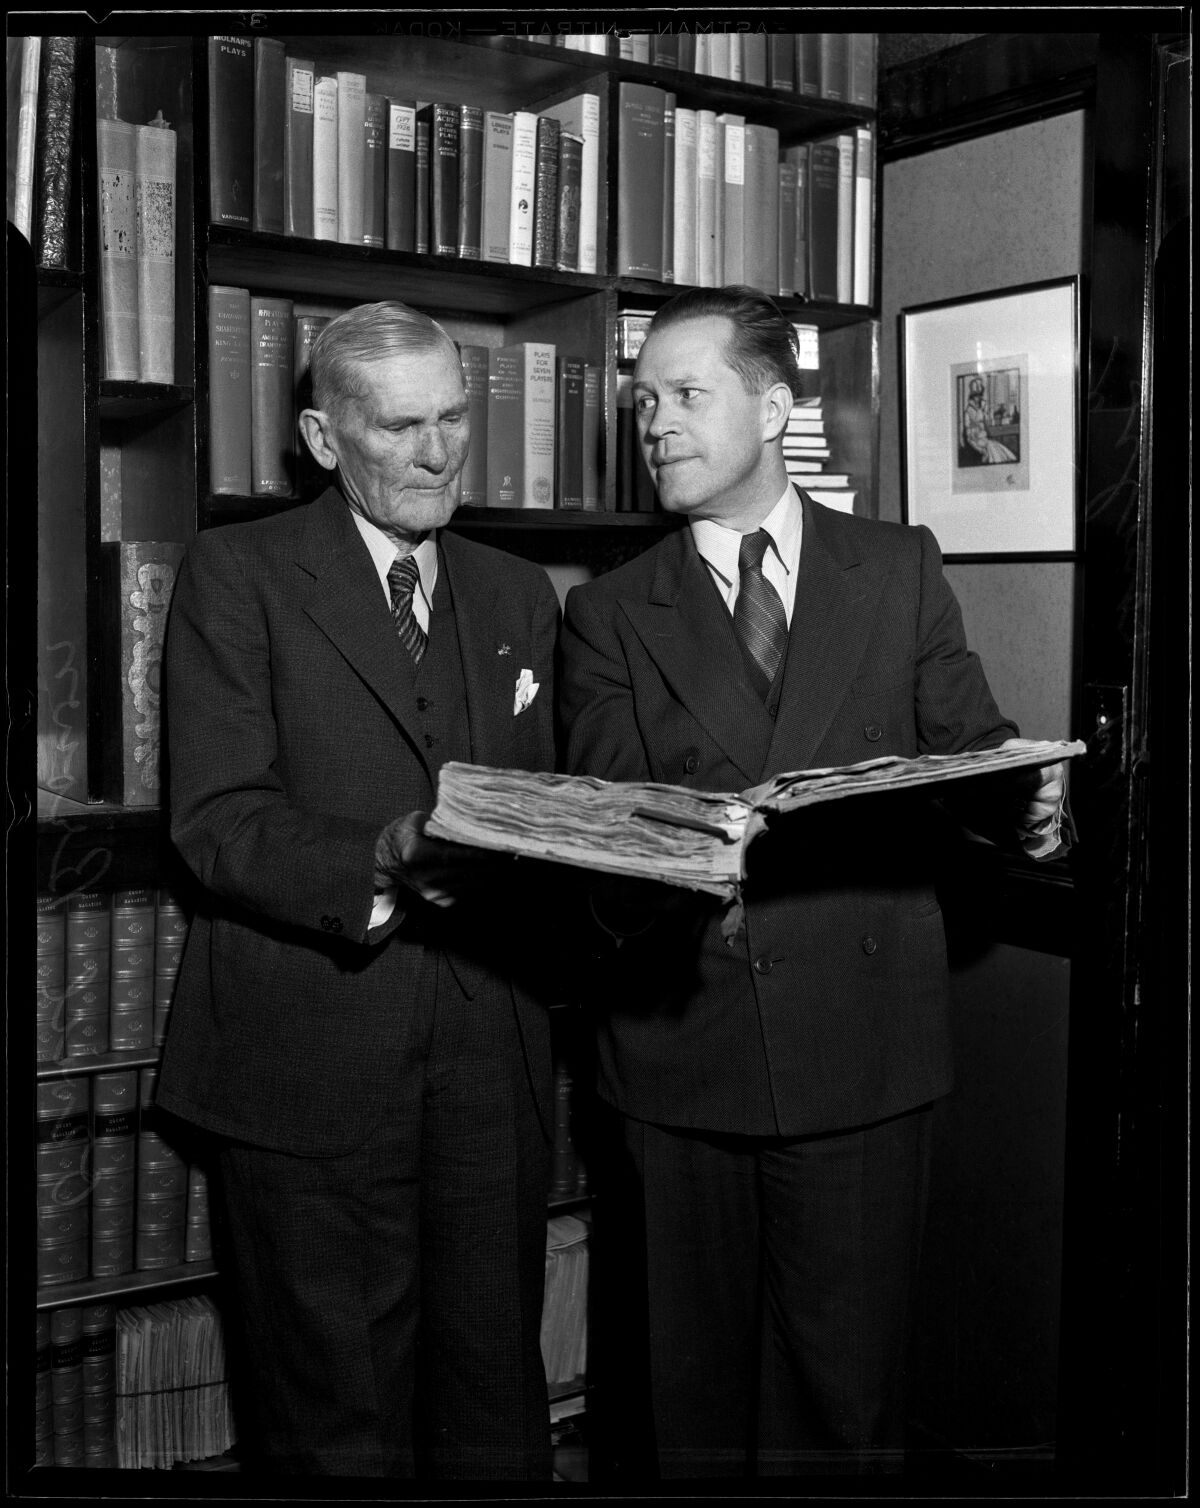 In a black-and-white photo, two men stand in front of a bookcase, one holding a large open book. 